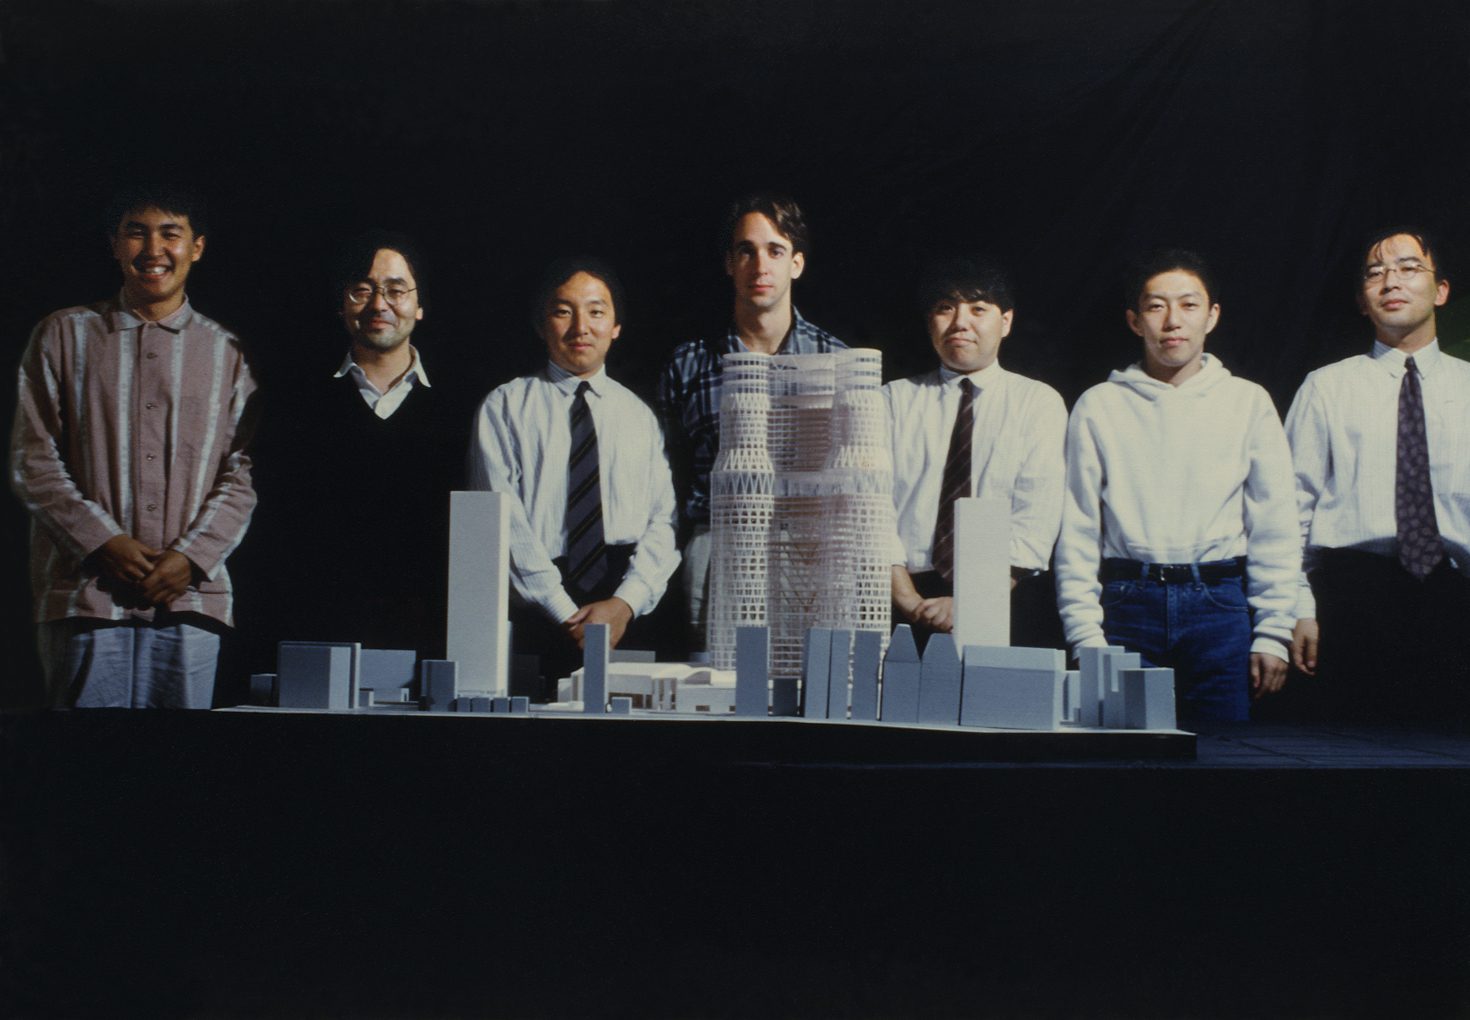 A group of people standing behind an architectural model